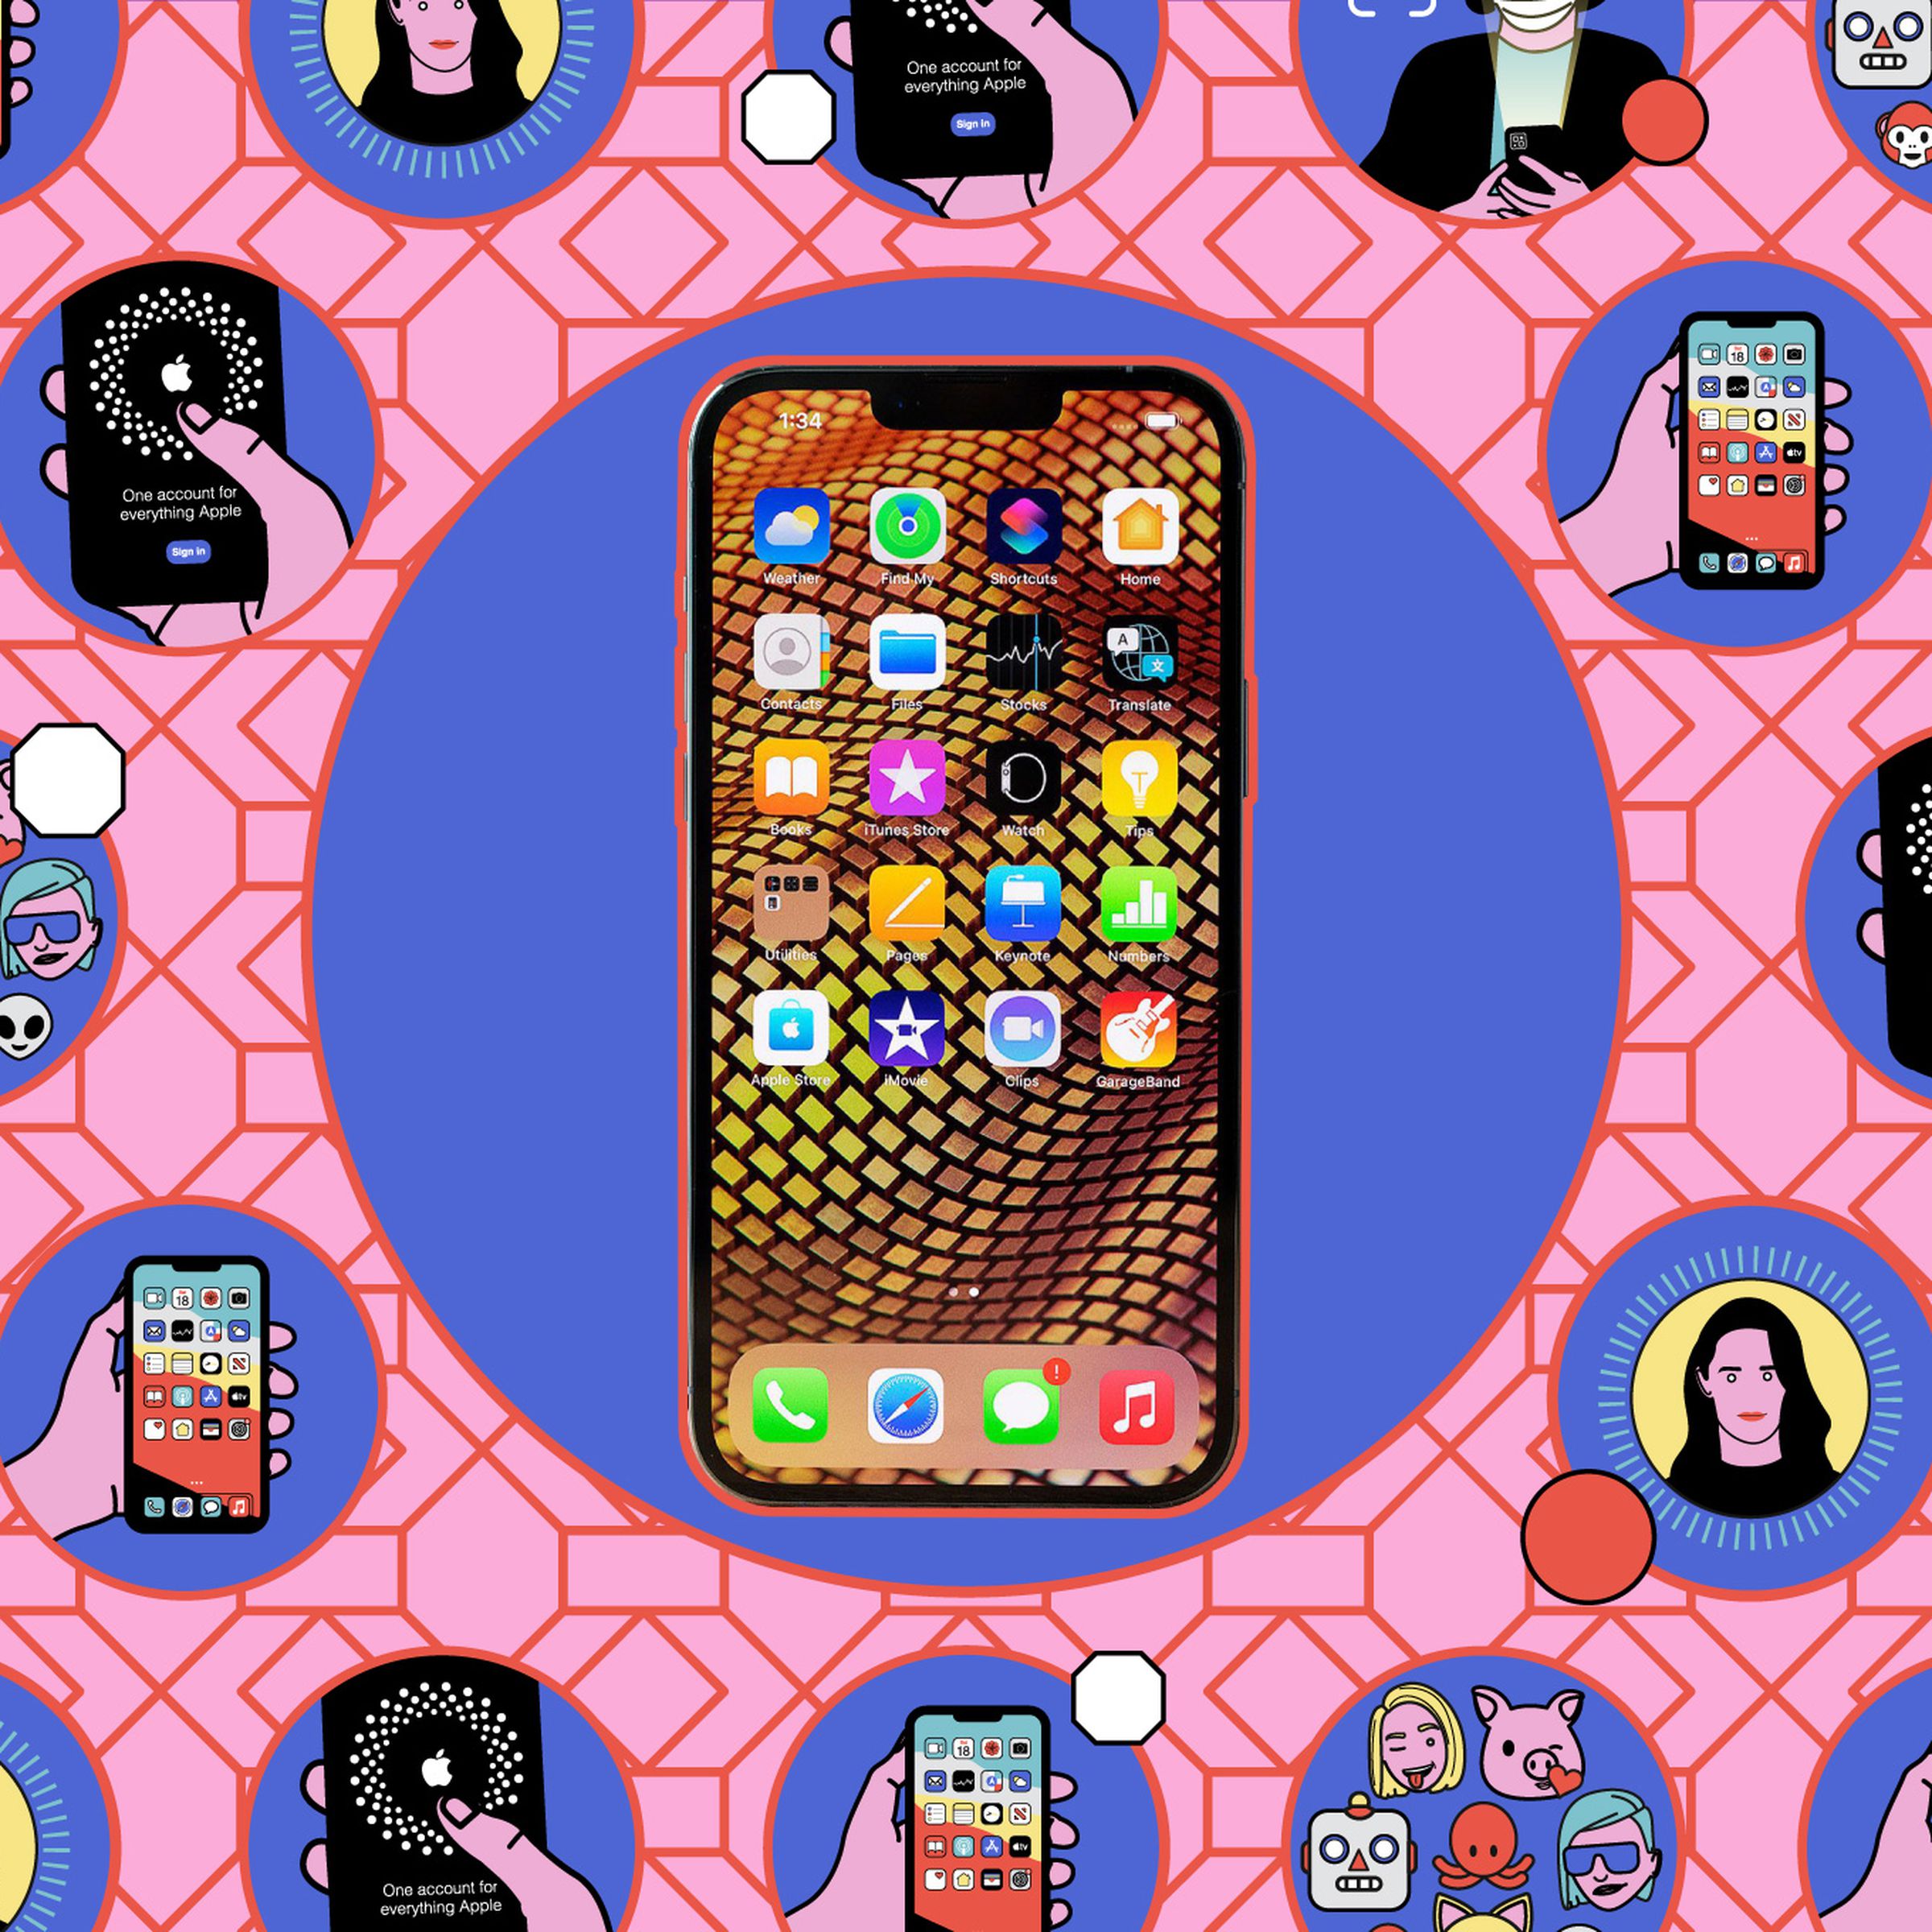 iPhone with homepage icons against an illustrated background